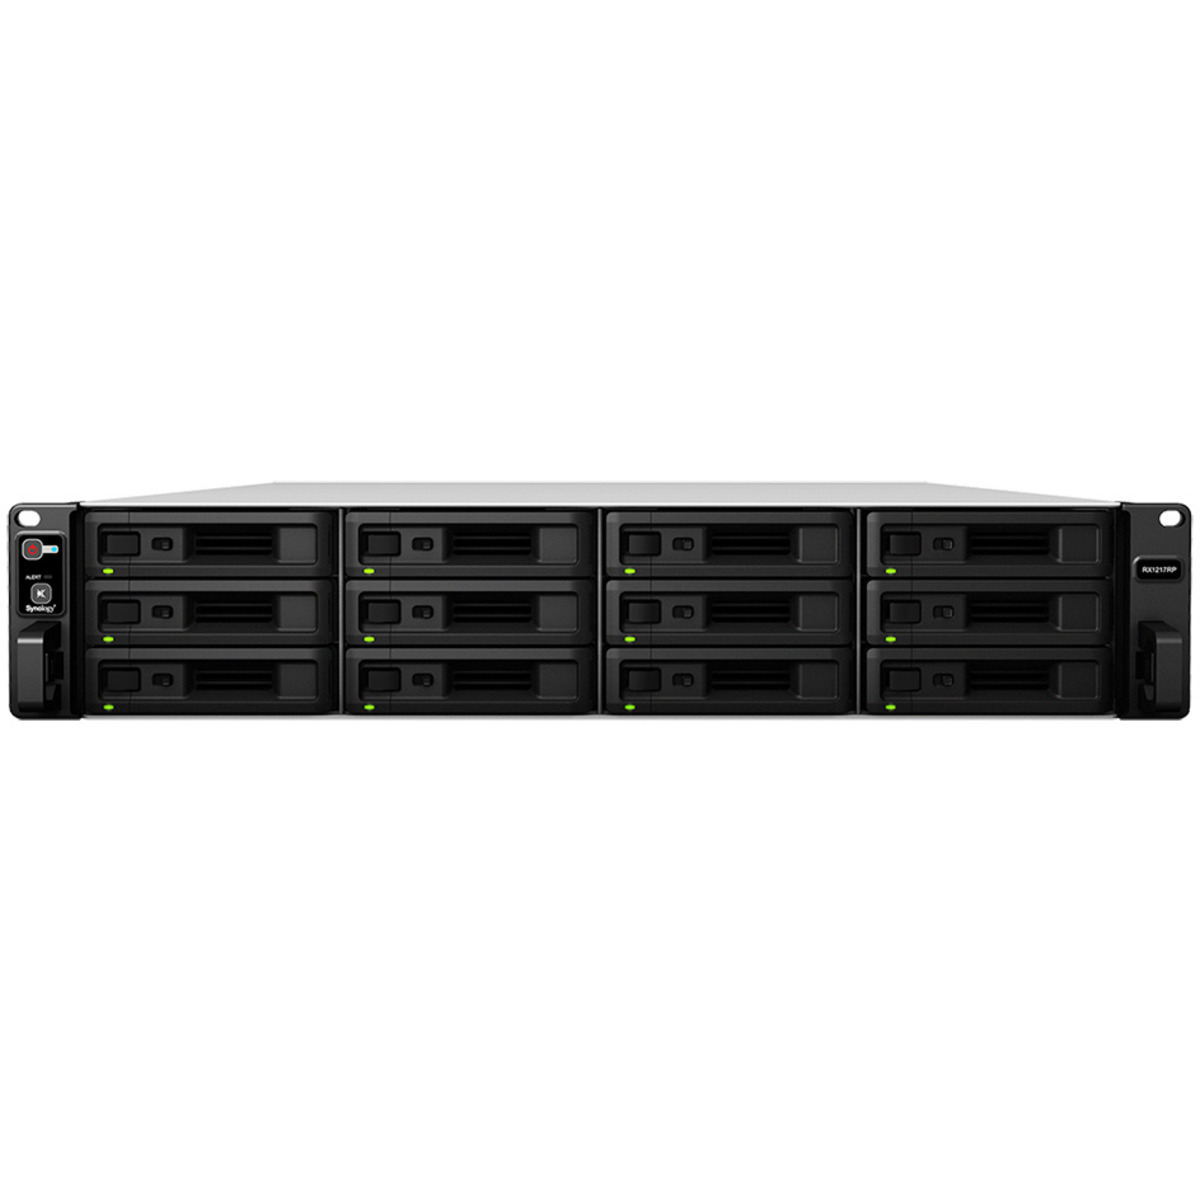 Synology RX1217 External Expansion Drive 24tb 12-Bay RackMount Large Business / Enterprise Expansion Enclosure 12x2tb Crucial MX500 CT2000MX500SSD1 2.5 560/510MB/s SATA 6Gb/s SSD CONSUMER Class Drives Installed - Burn-In Tested RX1217 External Expansion Drive